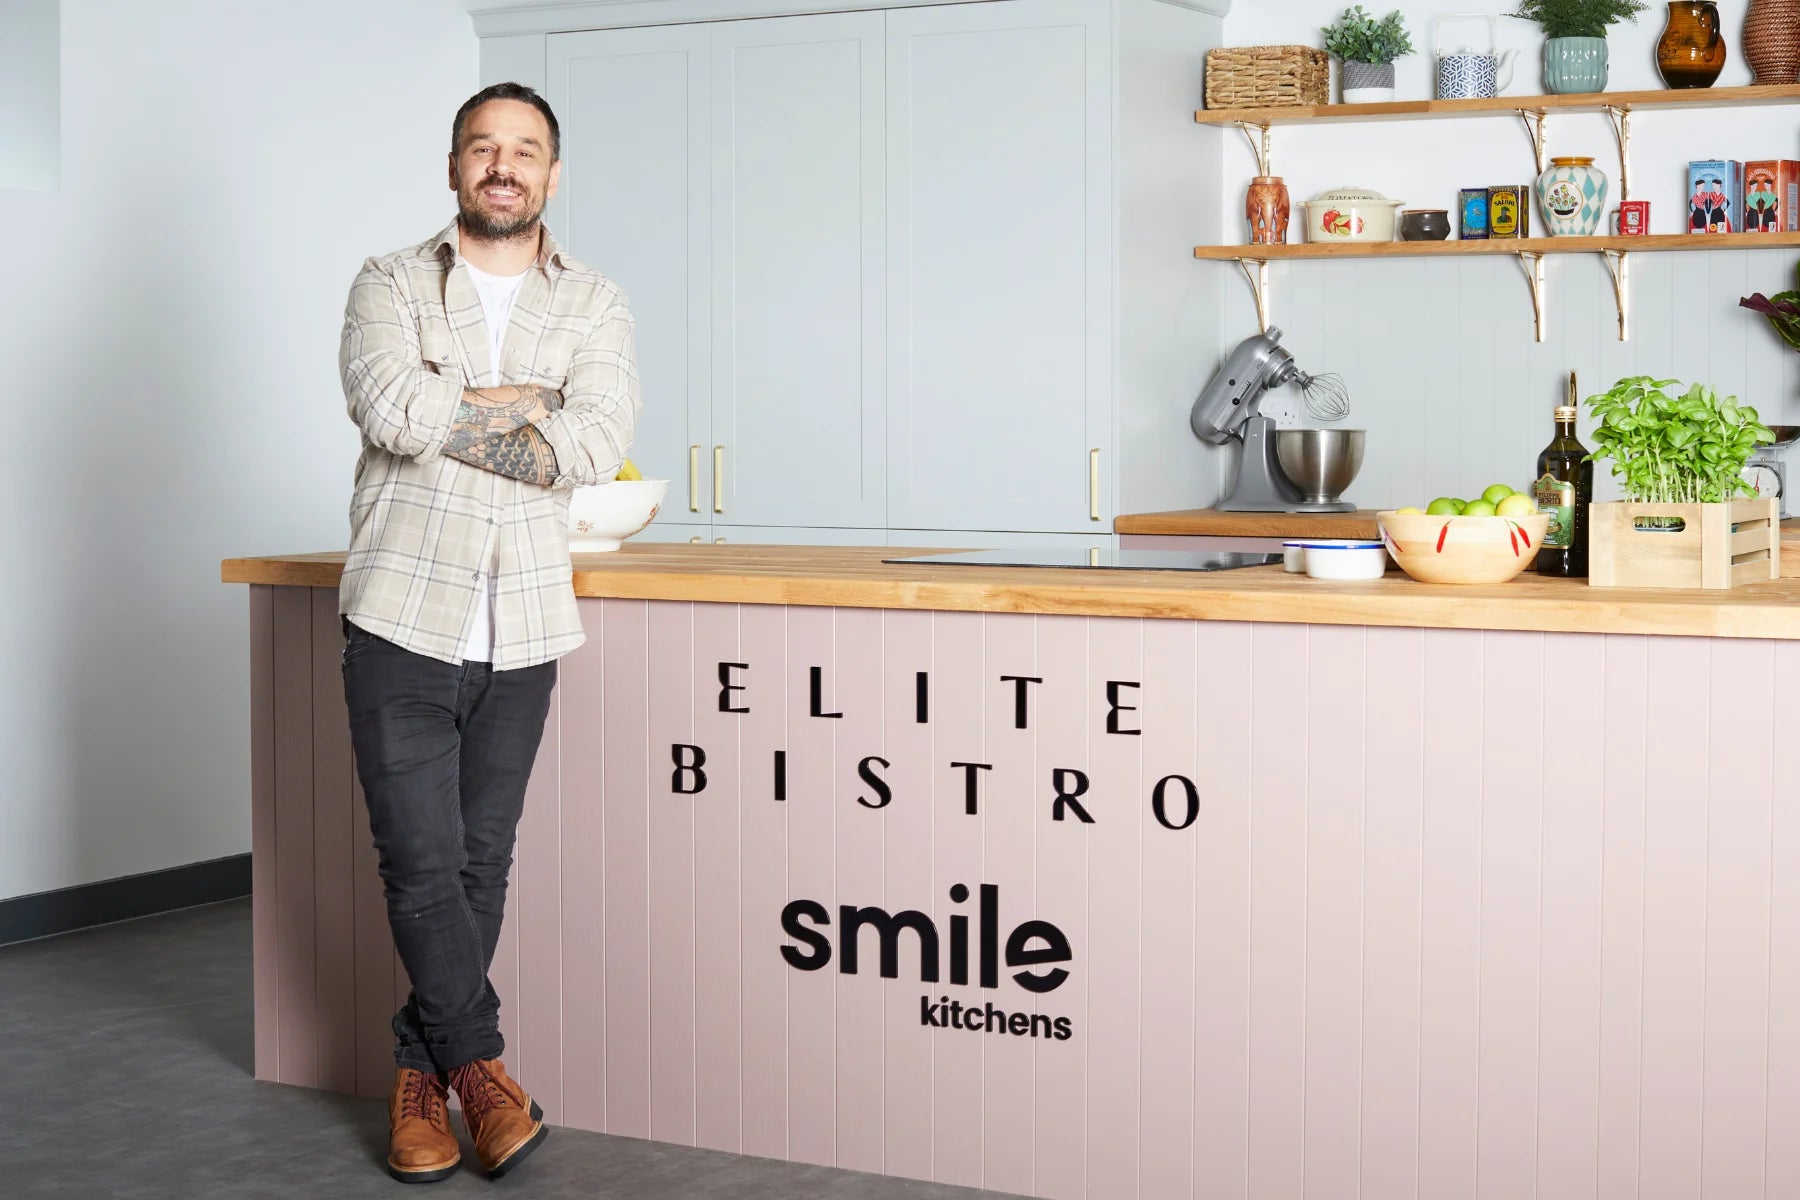 Load video: Gary usher in our test kitchen studio by Smile Kitchens.